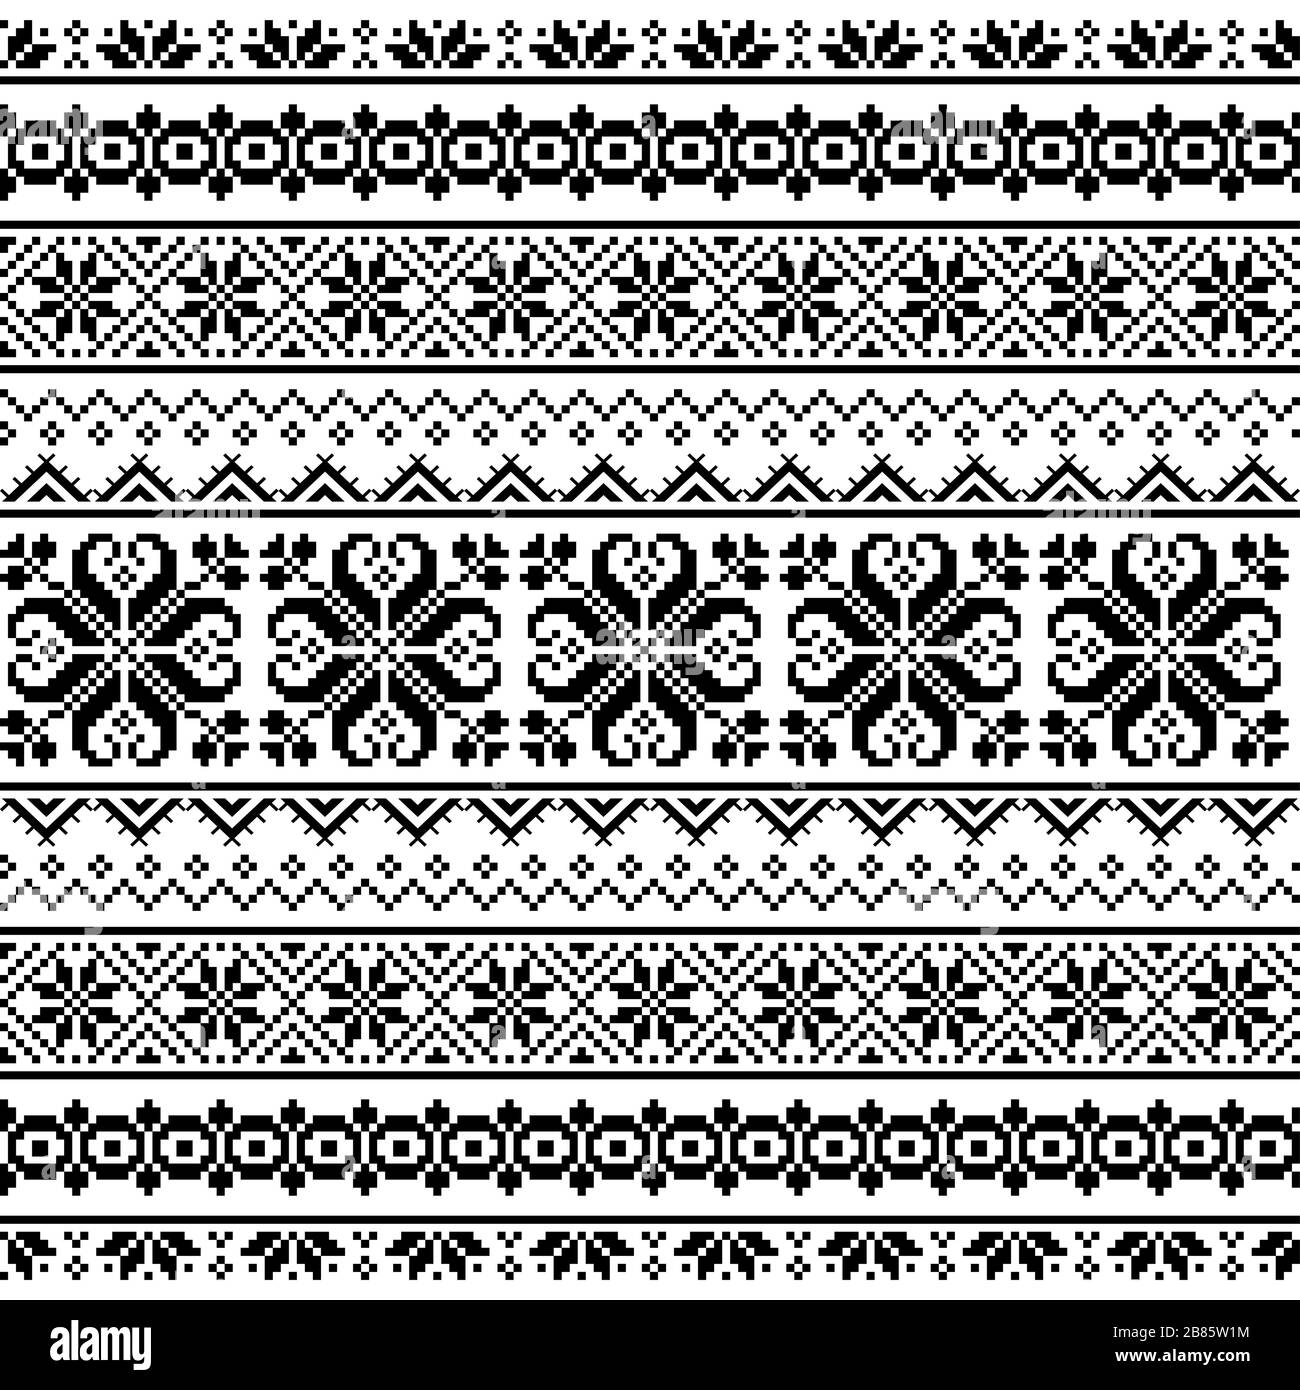 Ukrainian, Belarusian folk art embroidery seamless vector pattern - Vyshyvanka traditional embroidery repetitive design inspired by retro art Stock Vector